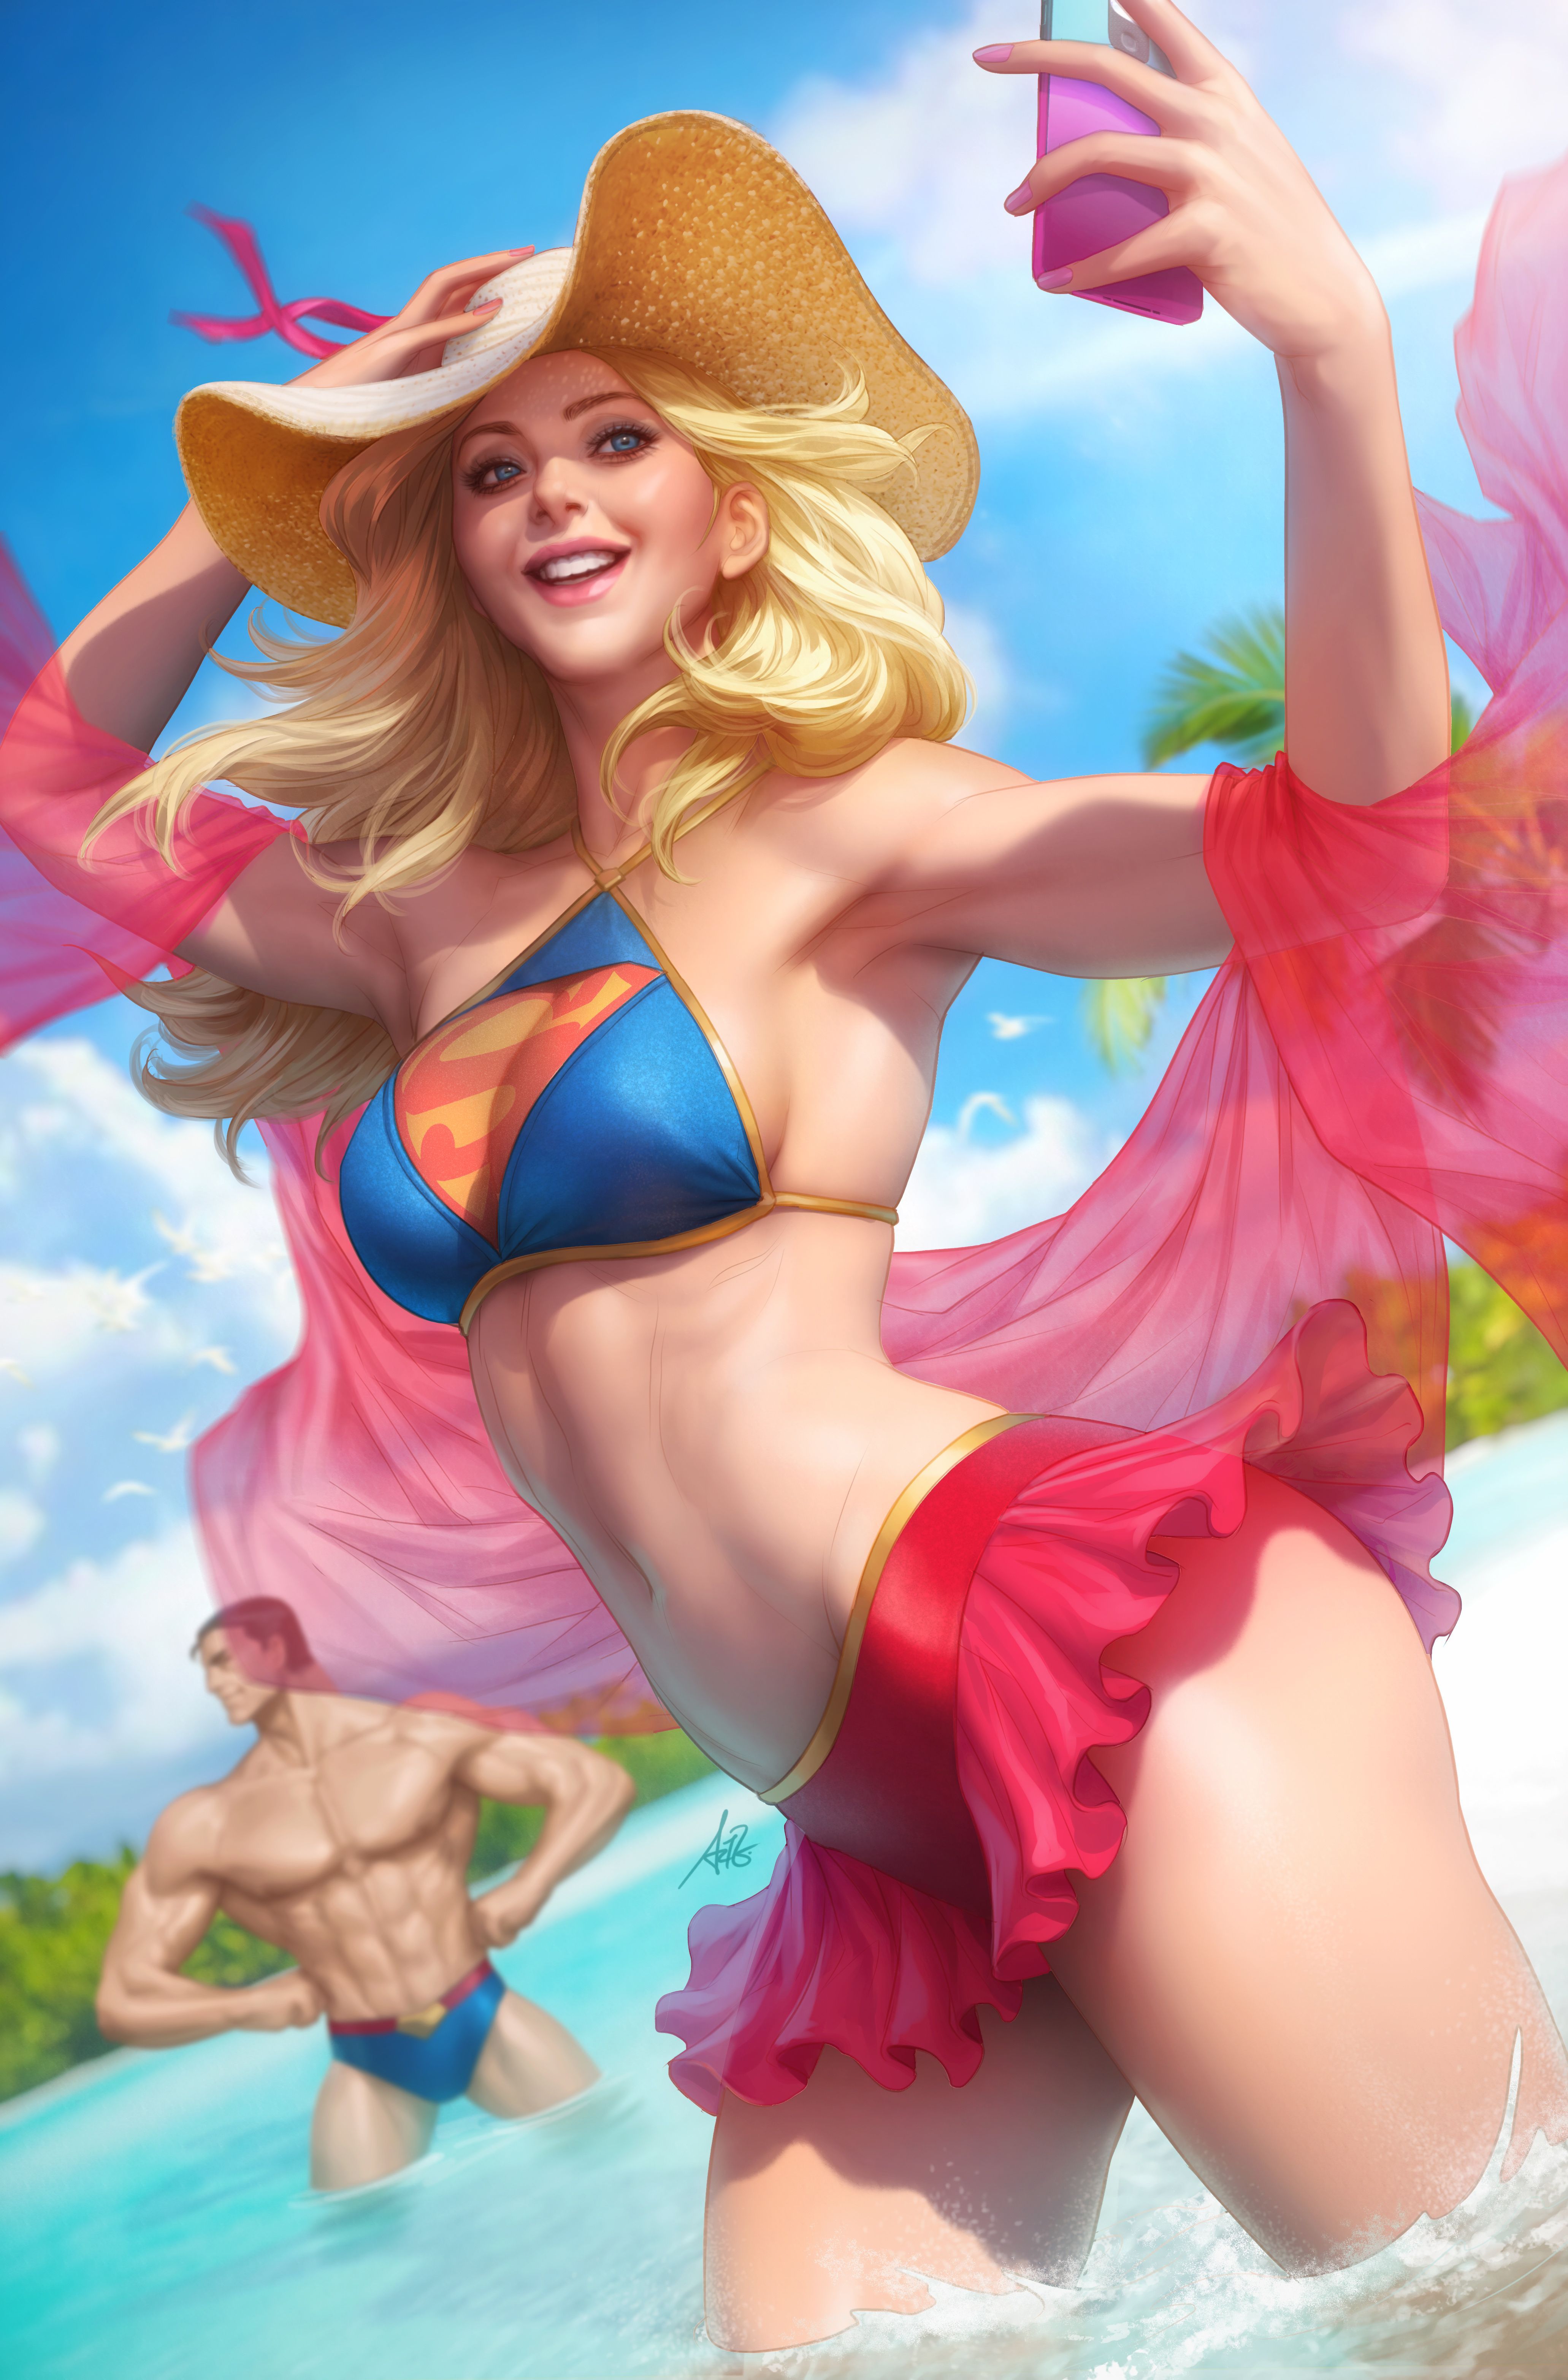 DC's Heroes and Villains Show Skin in Thirsty Swimsuit Variant Covers